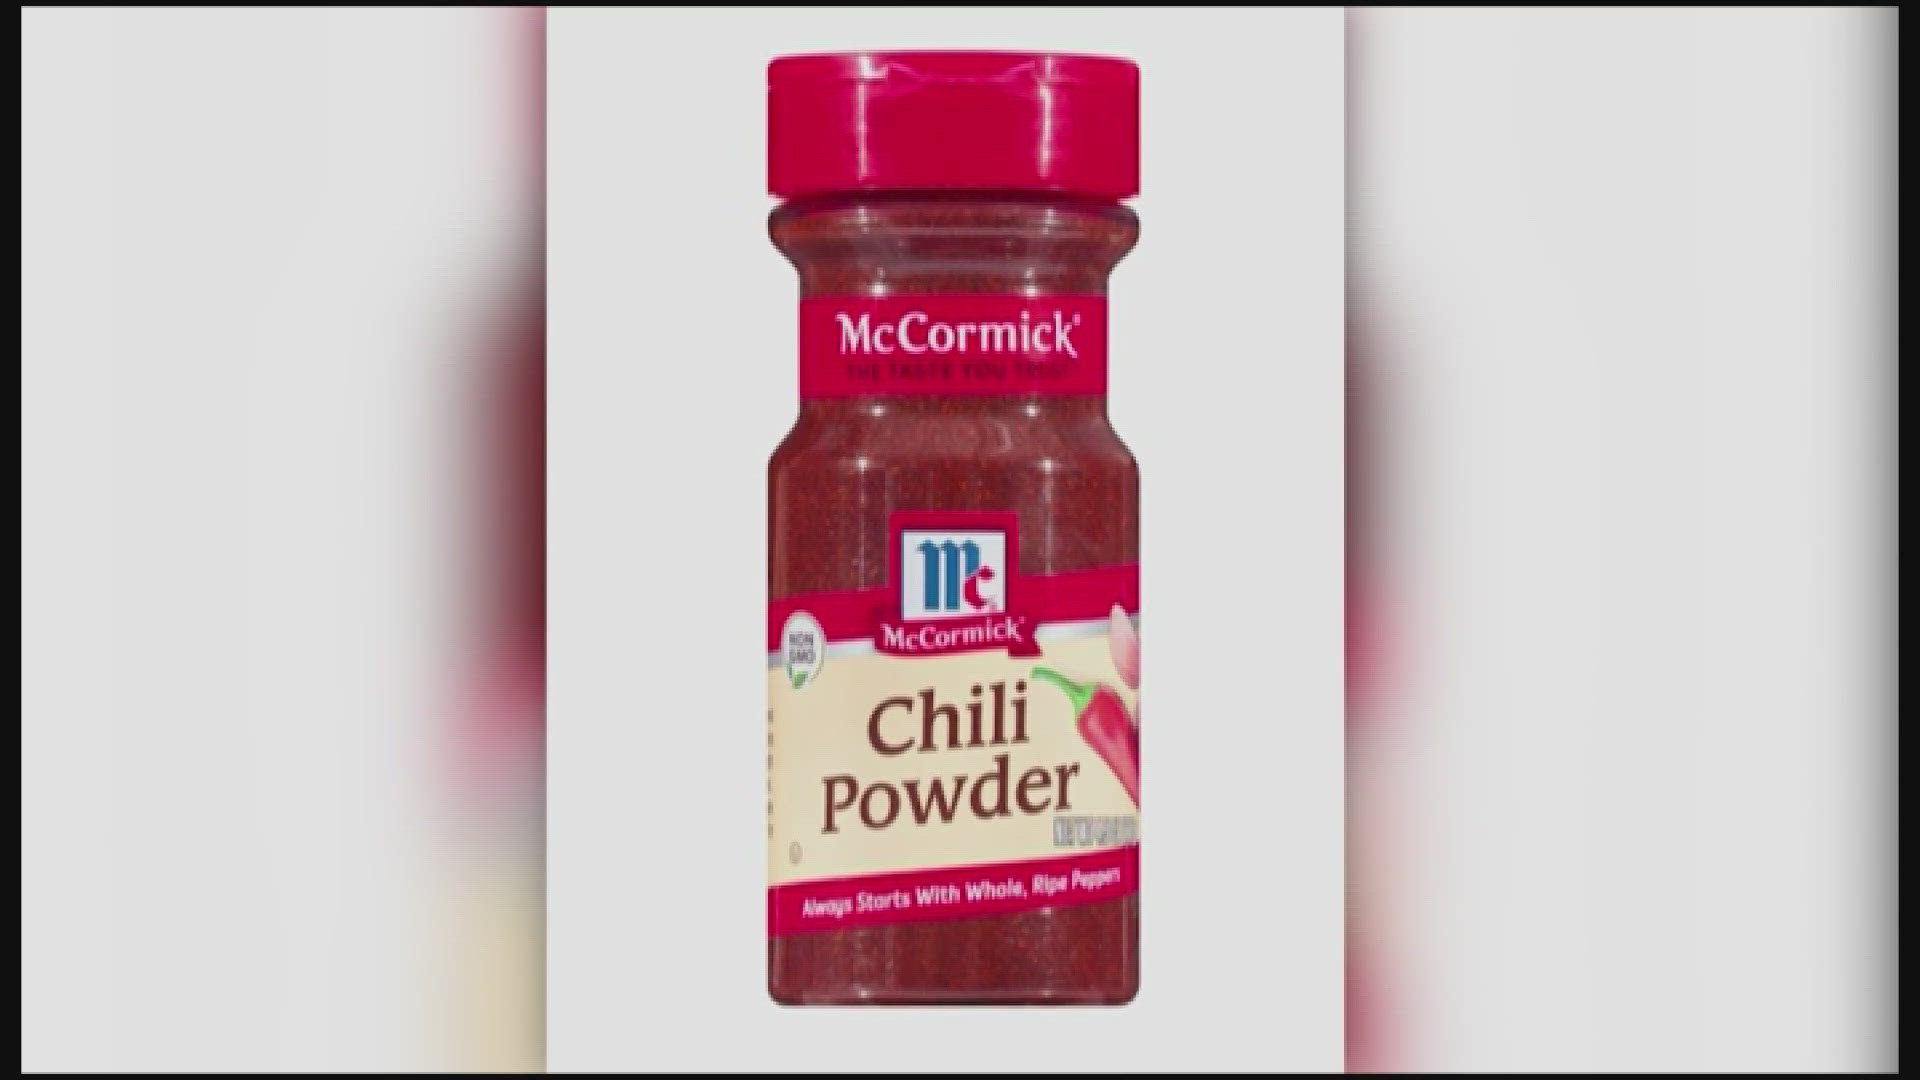 McCormick says the new cap will keep spices fresher than the old version it's had for 40 years.